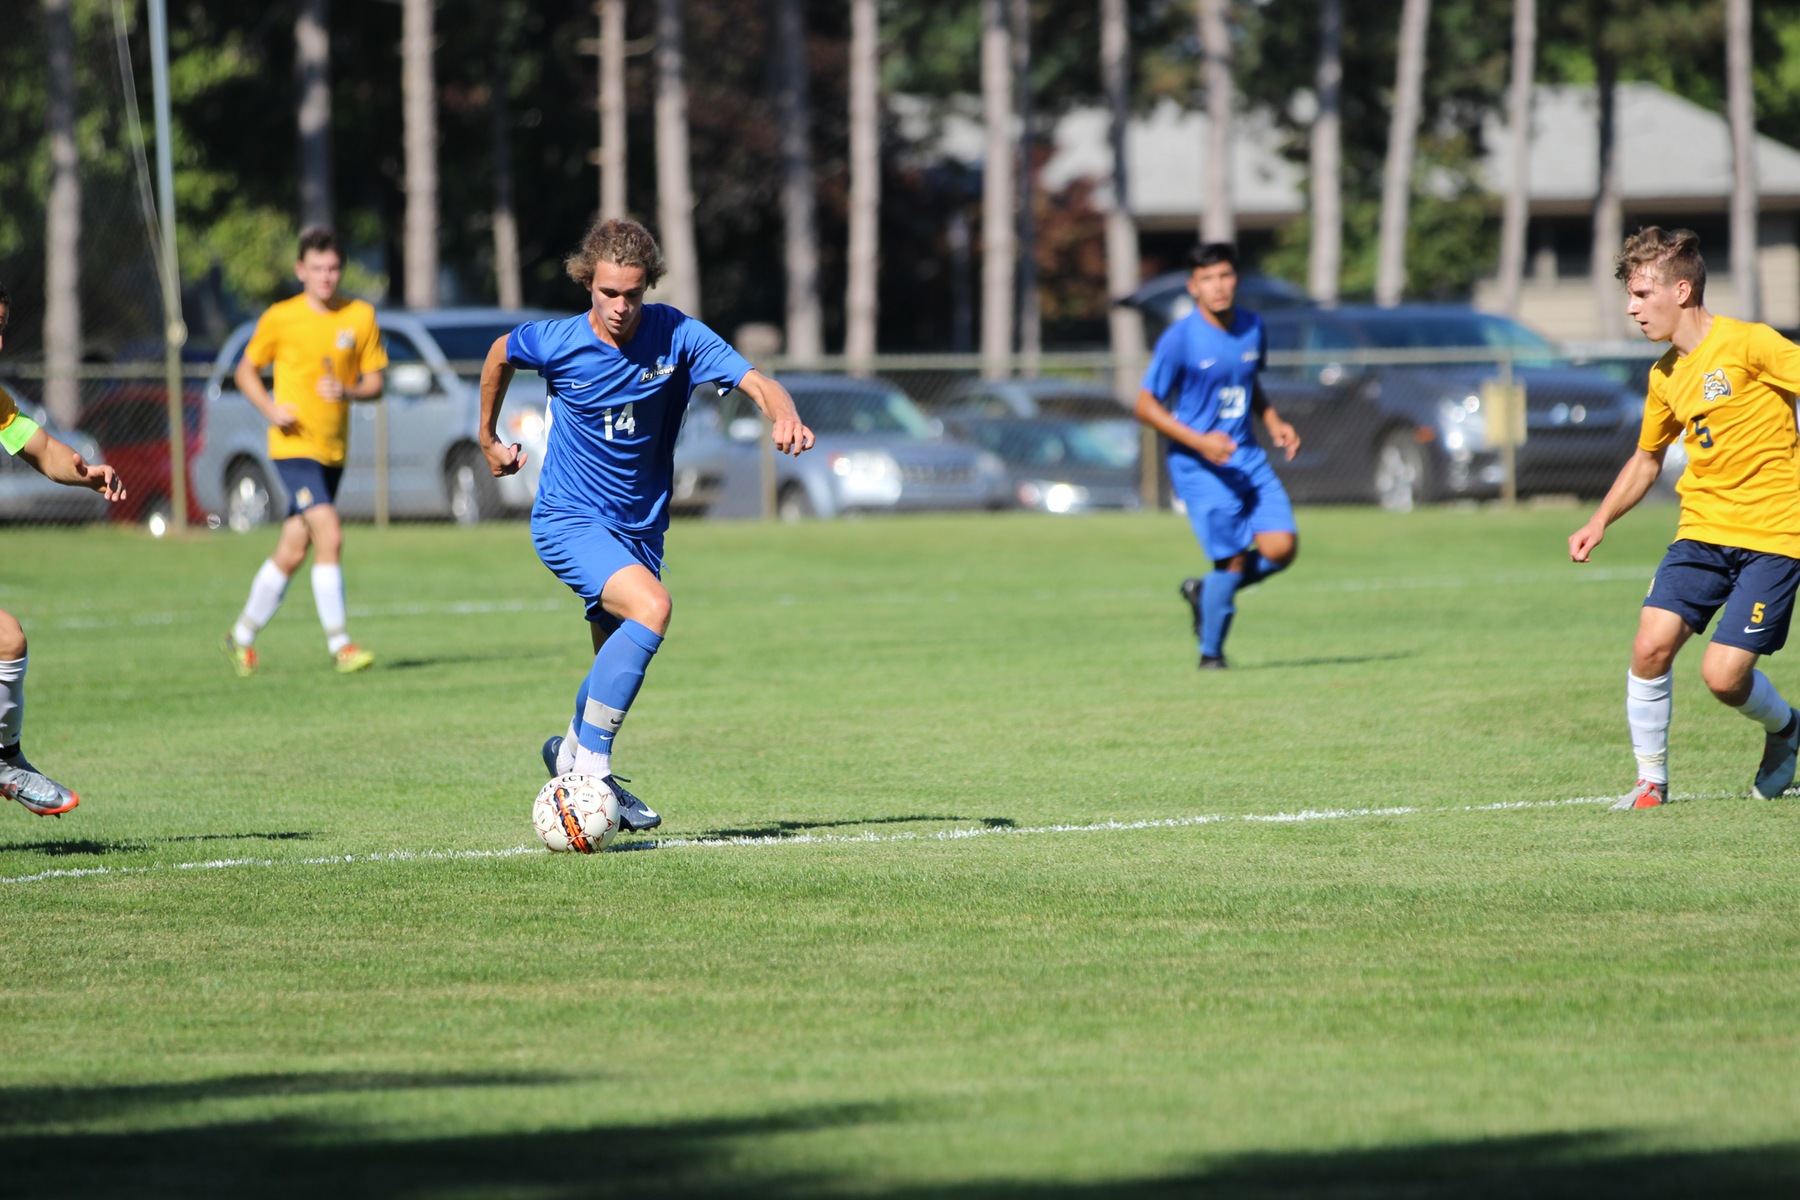 Muskegon CC men's soccer player dribbles up the field